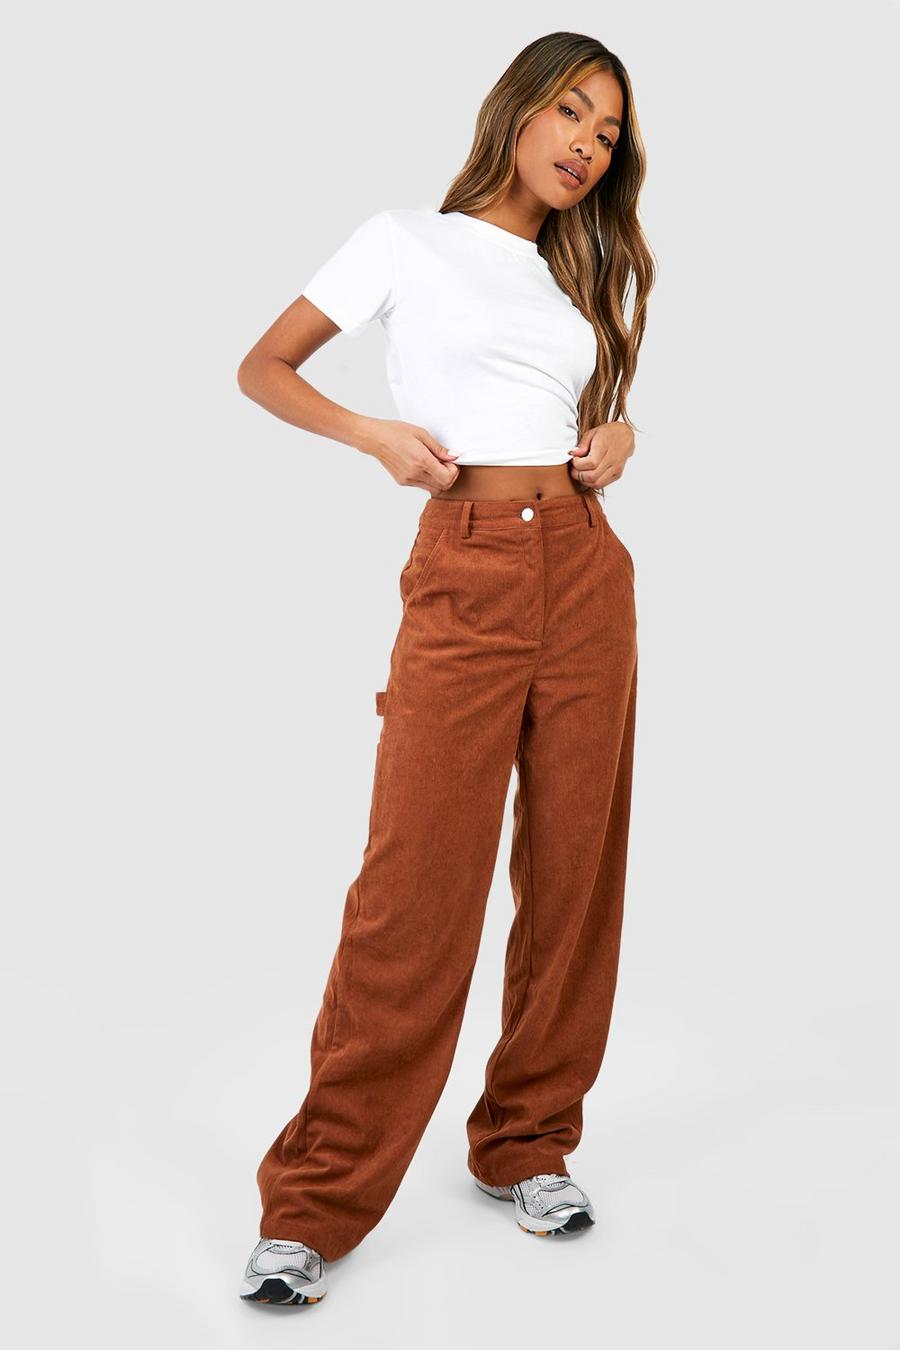 Tan Corduroy Relaxed Fit Carpenter Pants